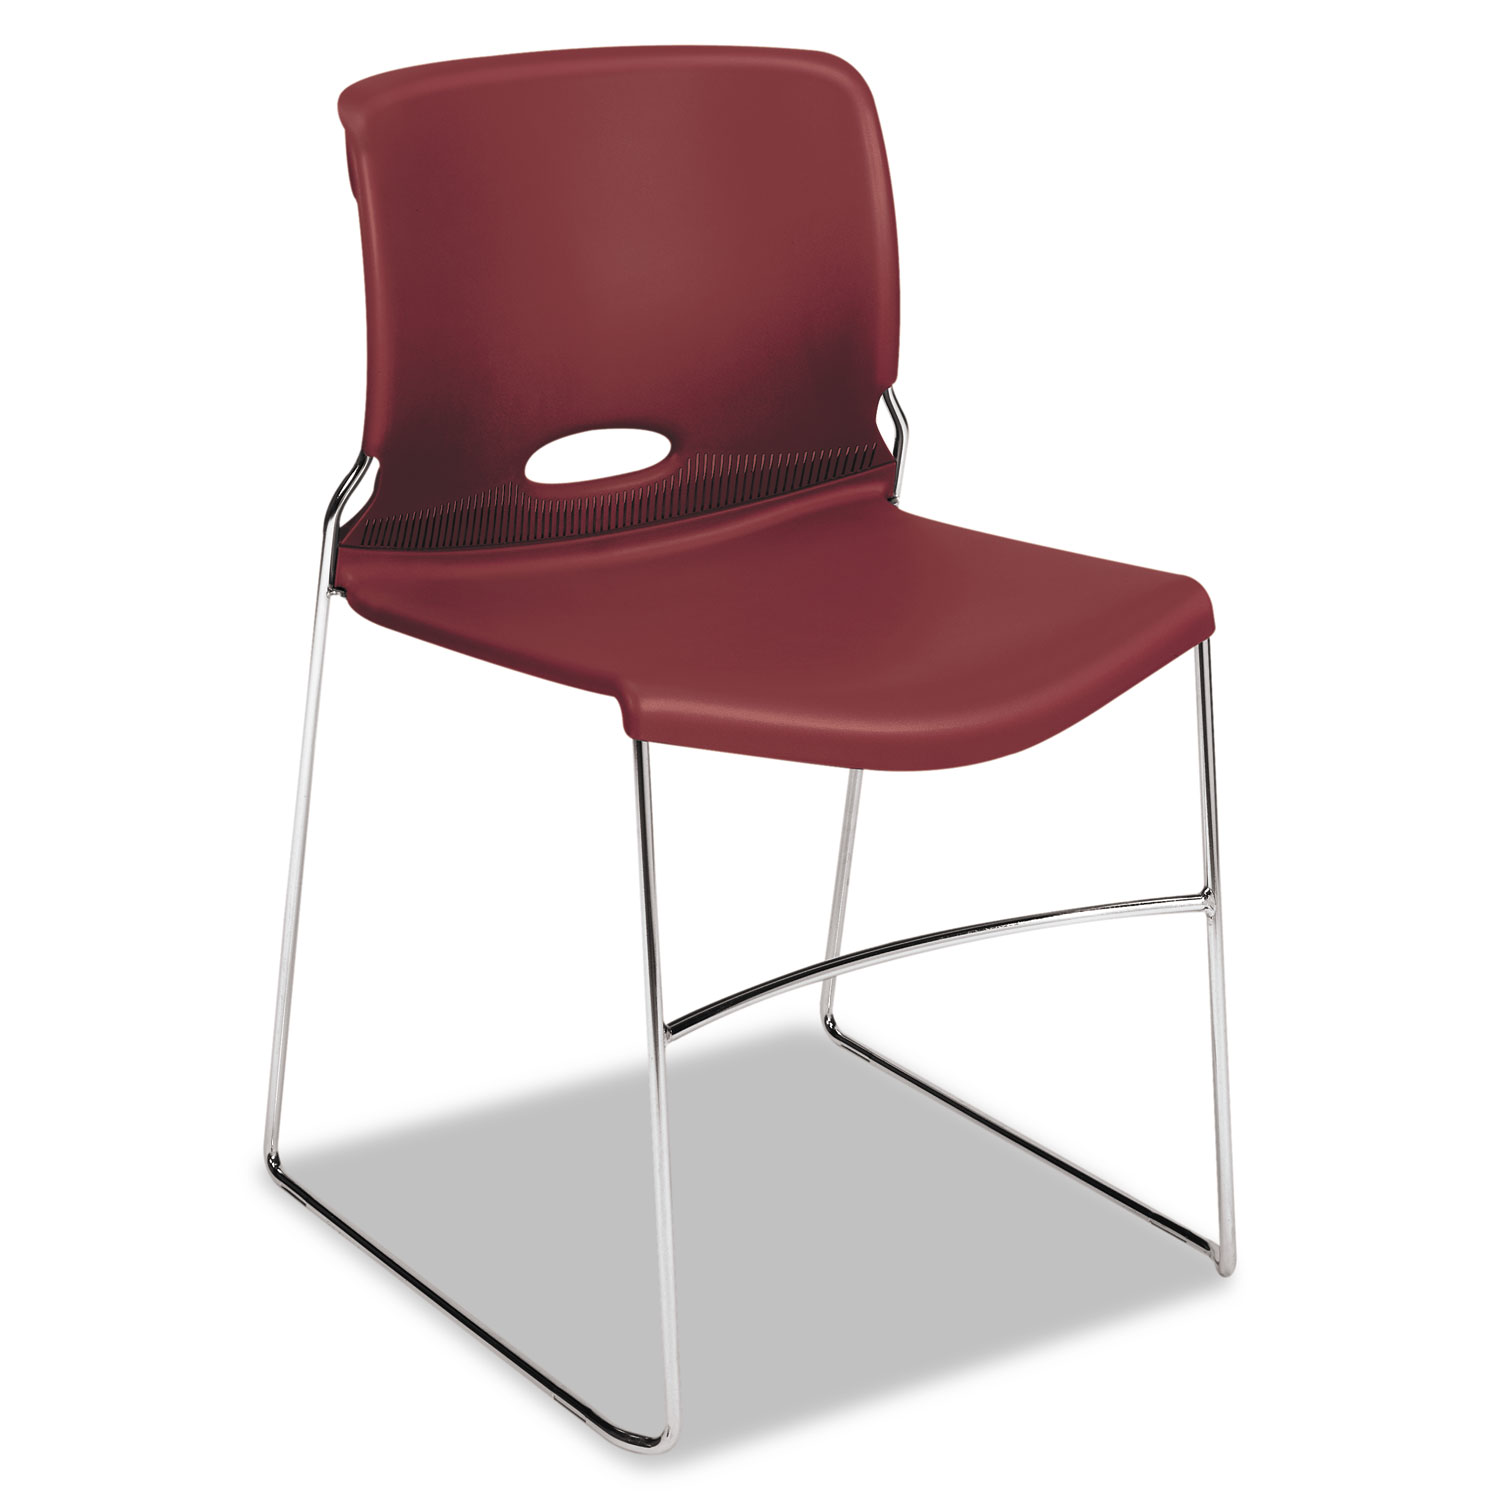 Olson Stacker Series Chair, Mulberry, 4/Carton